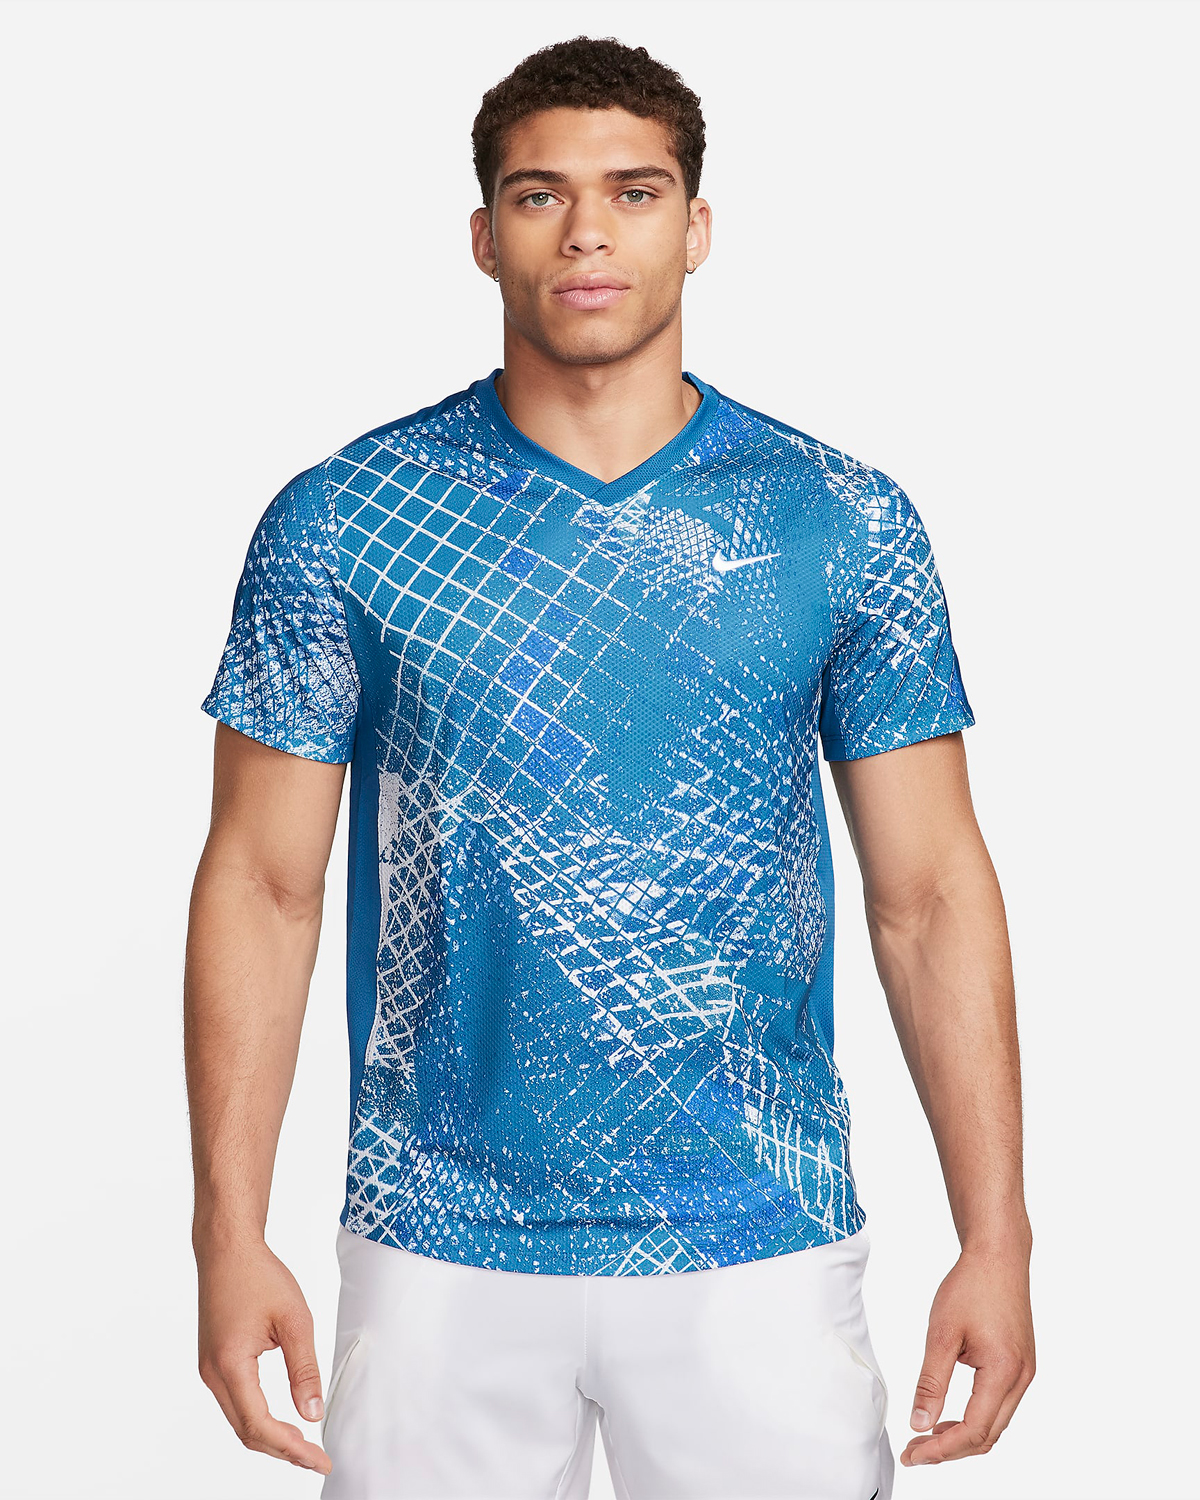 Nike-Court-Victory-Tennis-Top-Industrial-Blue